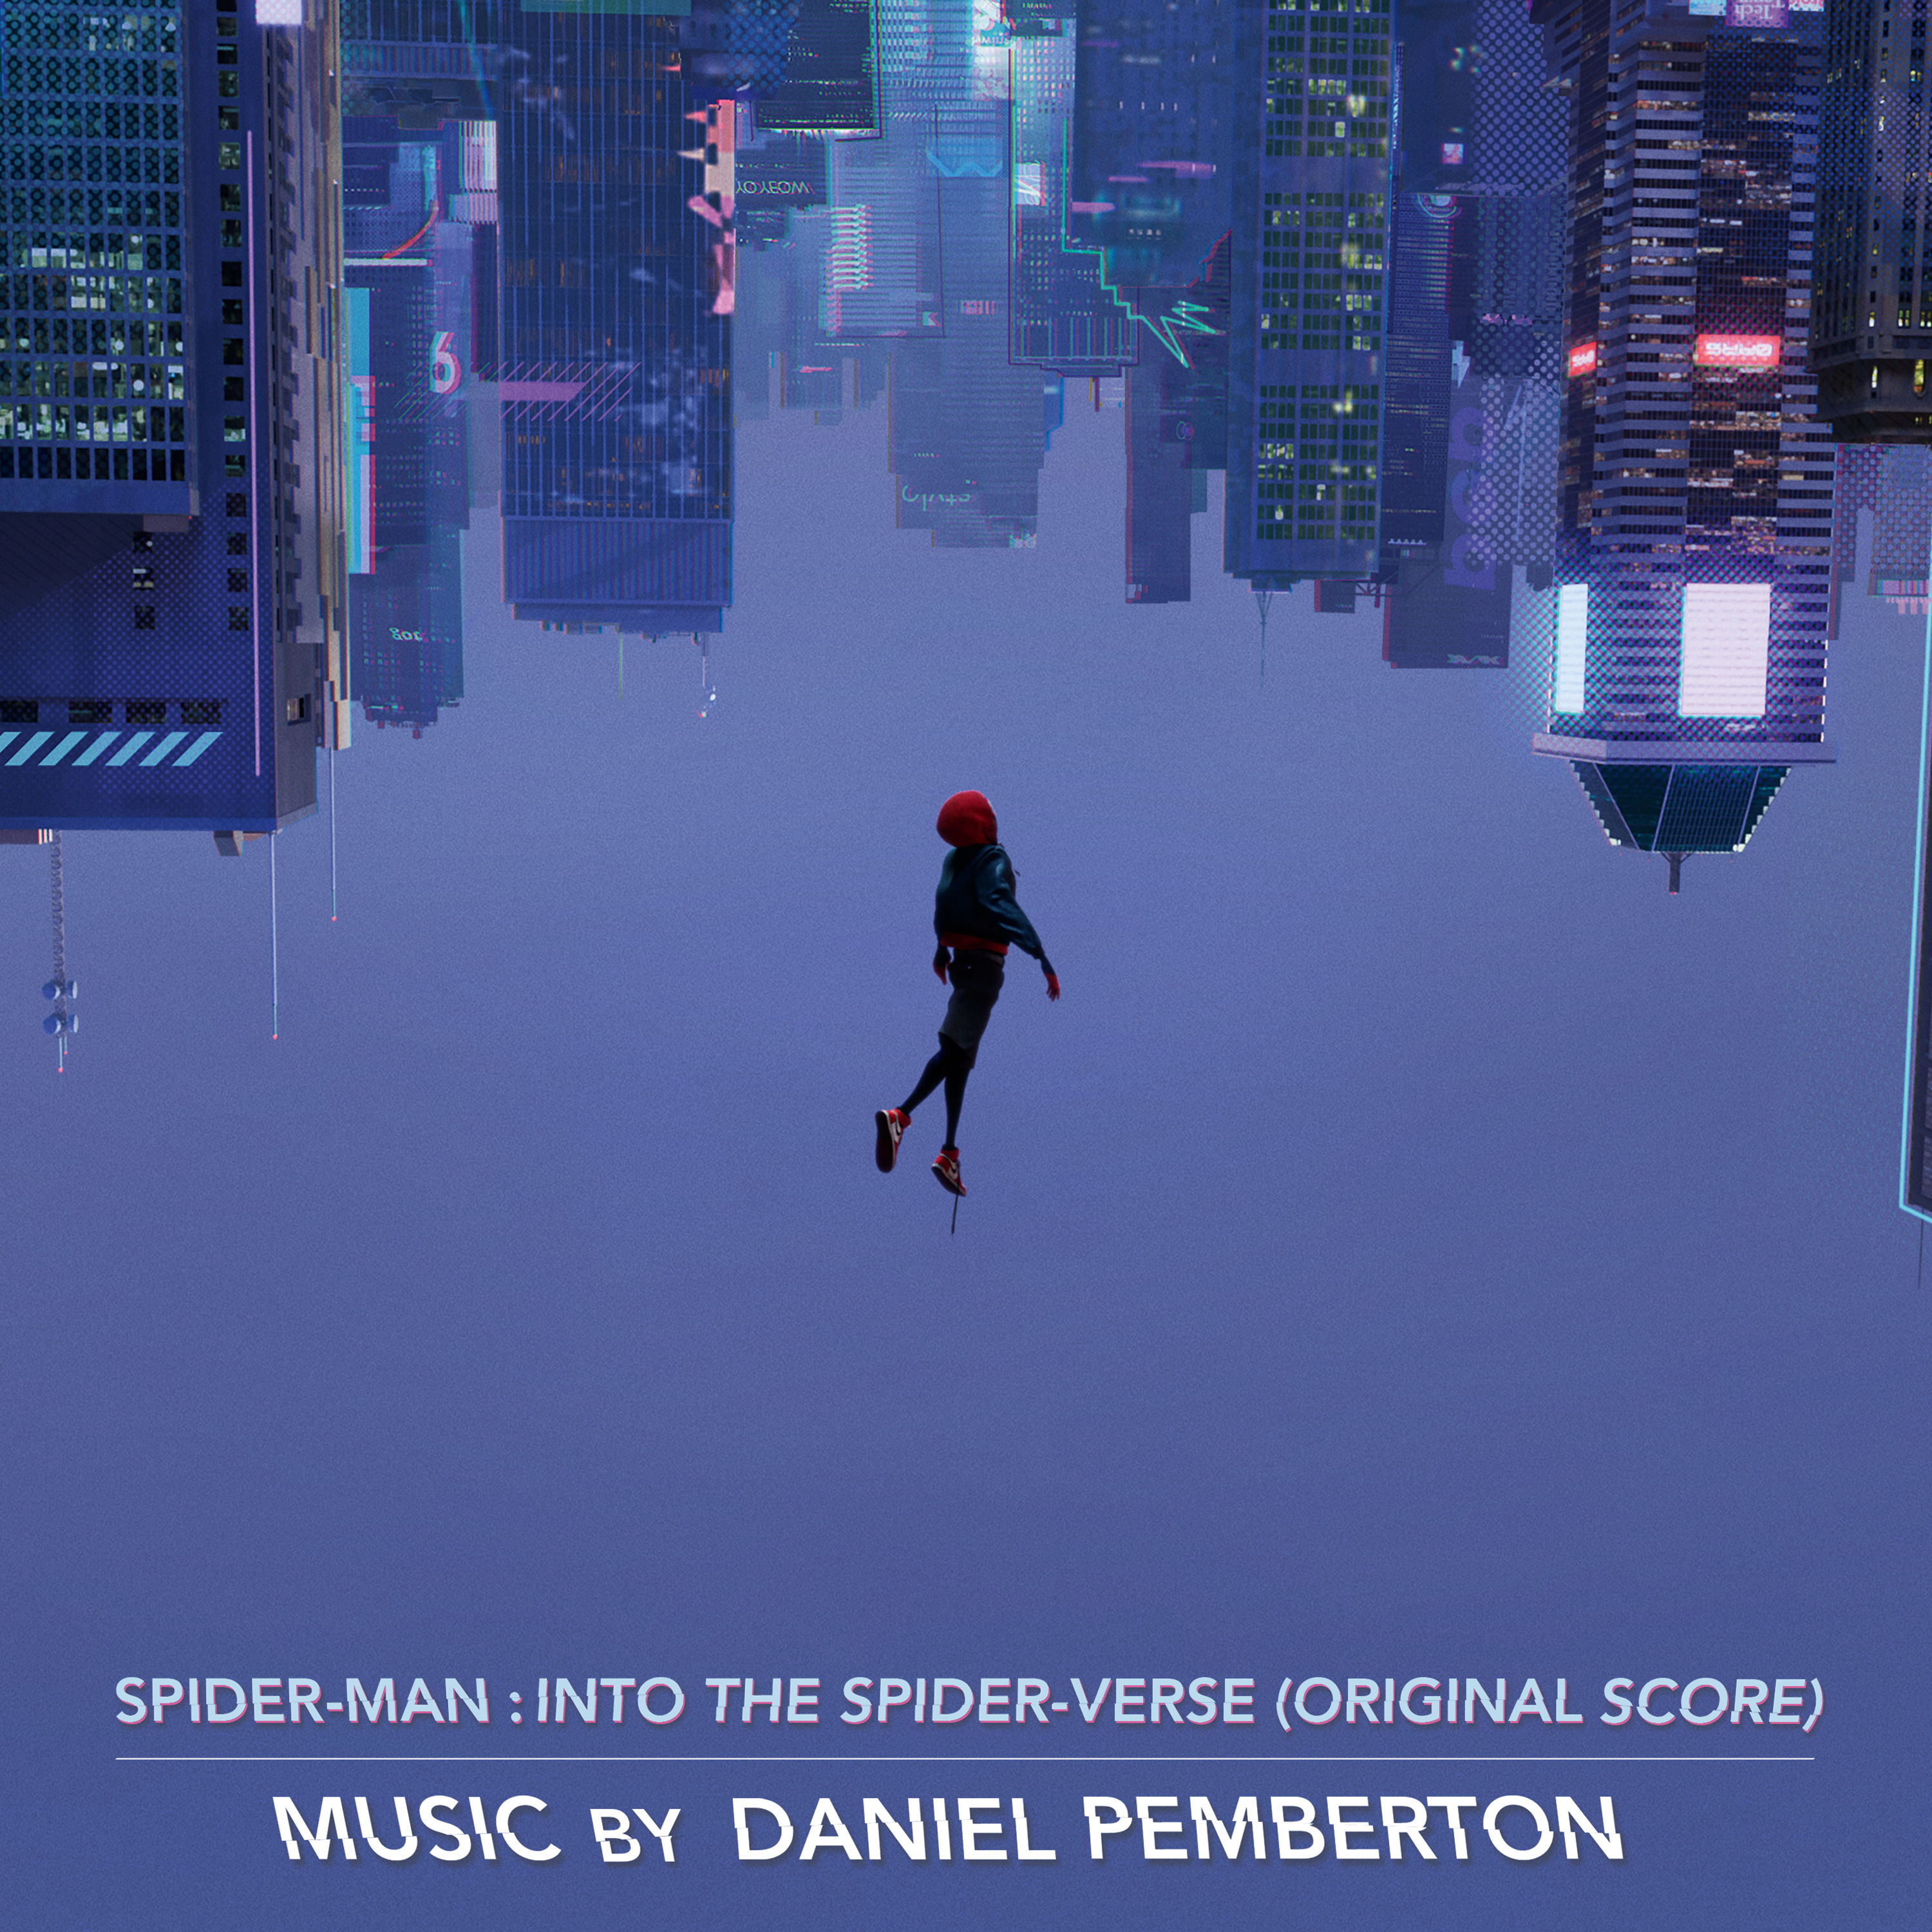 spiderman in the spider verse songs